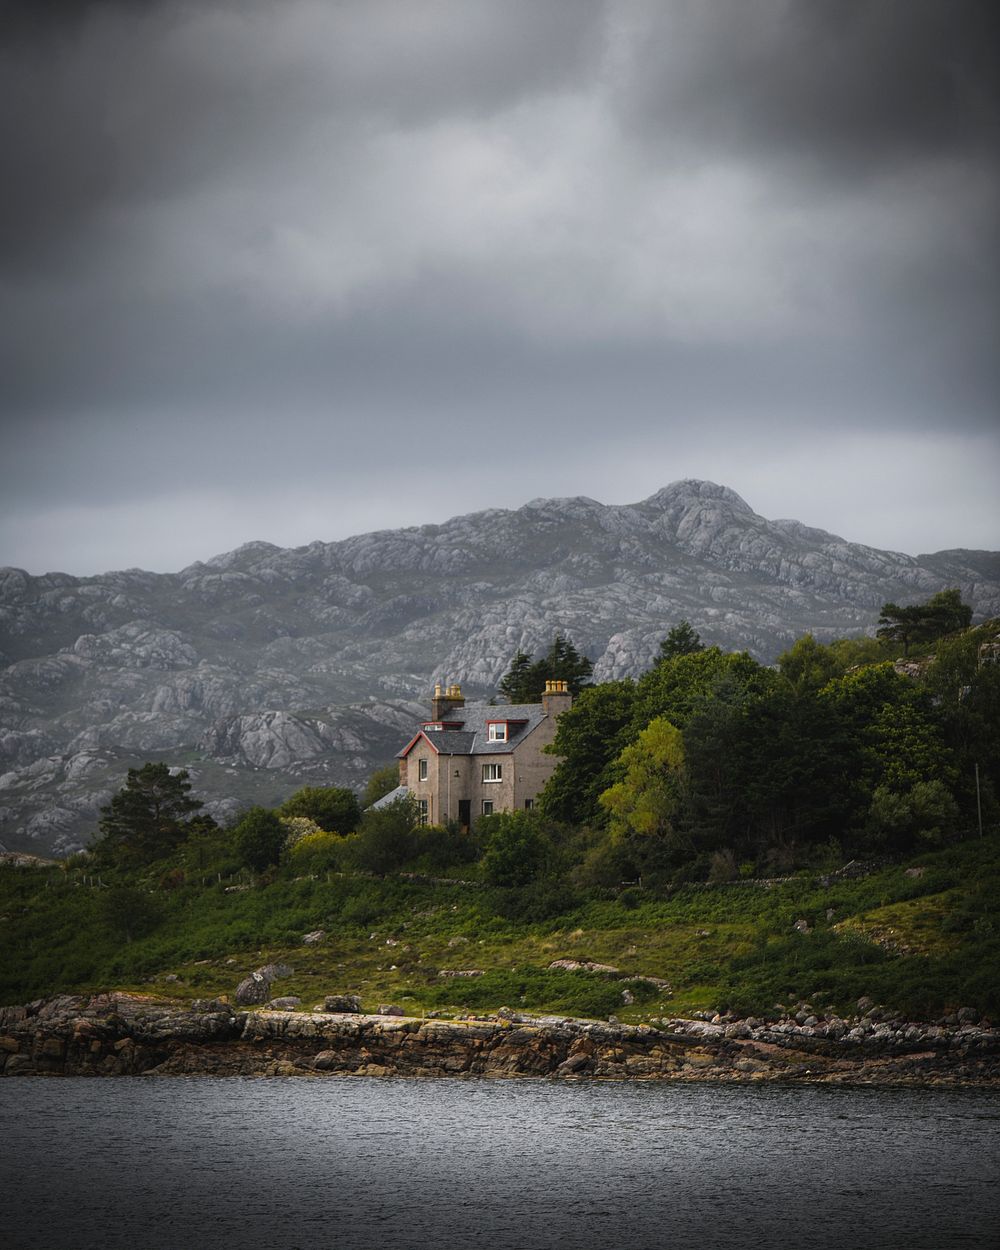 Stone house by the lake on a cloudy day